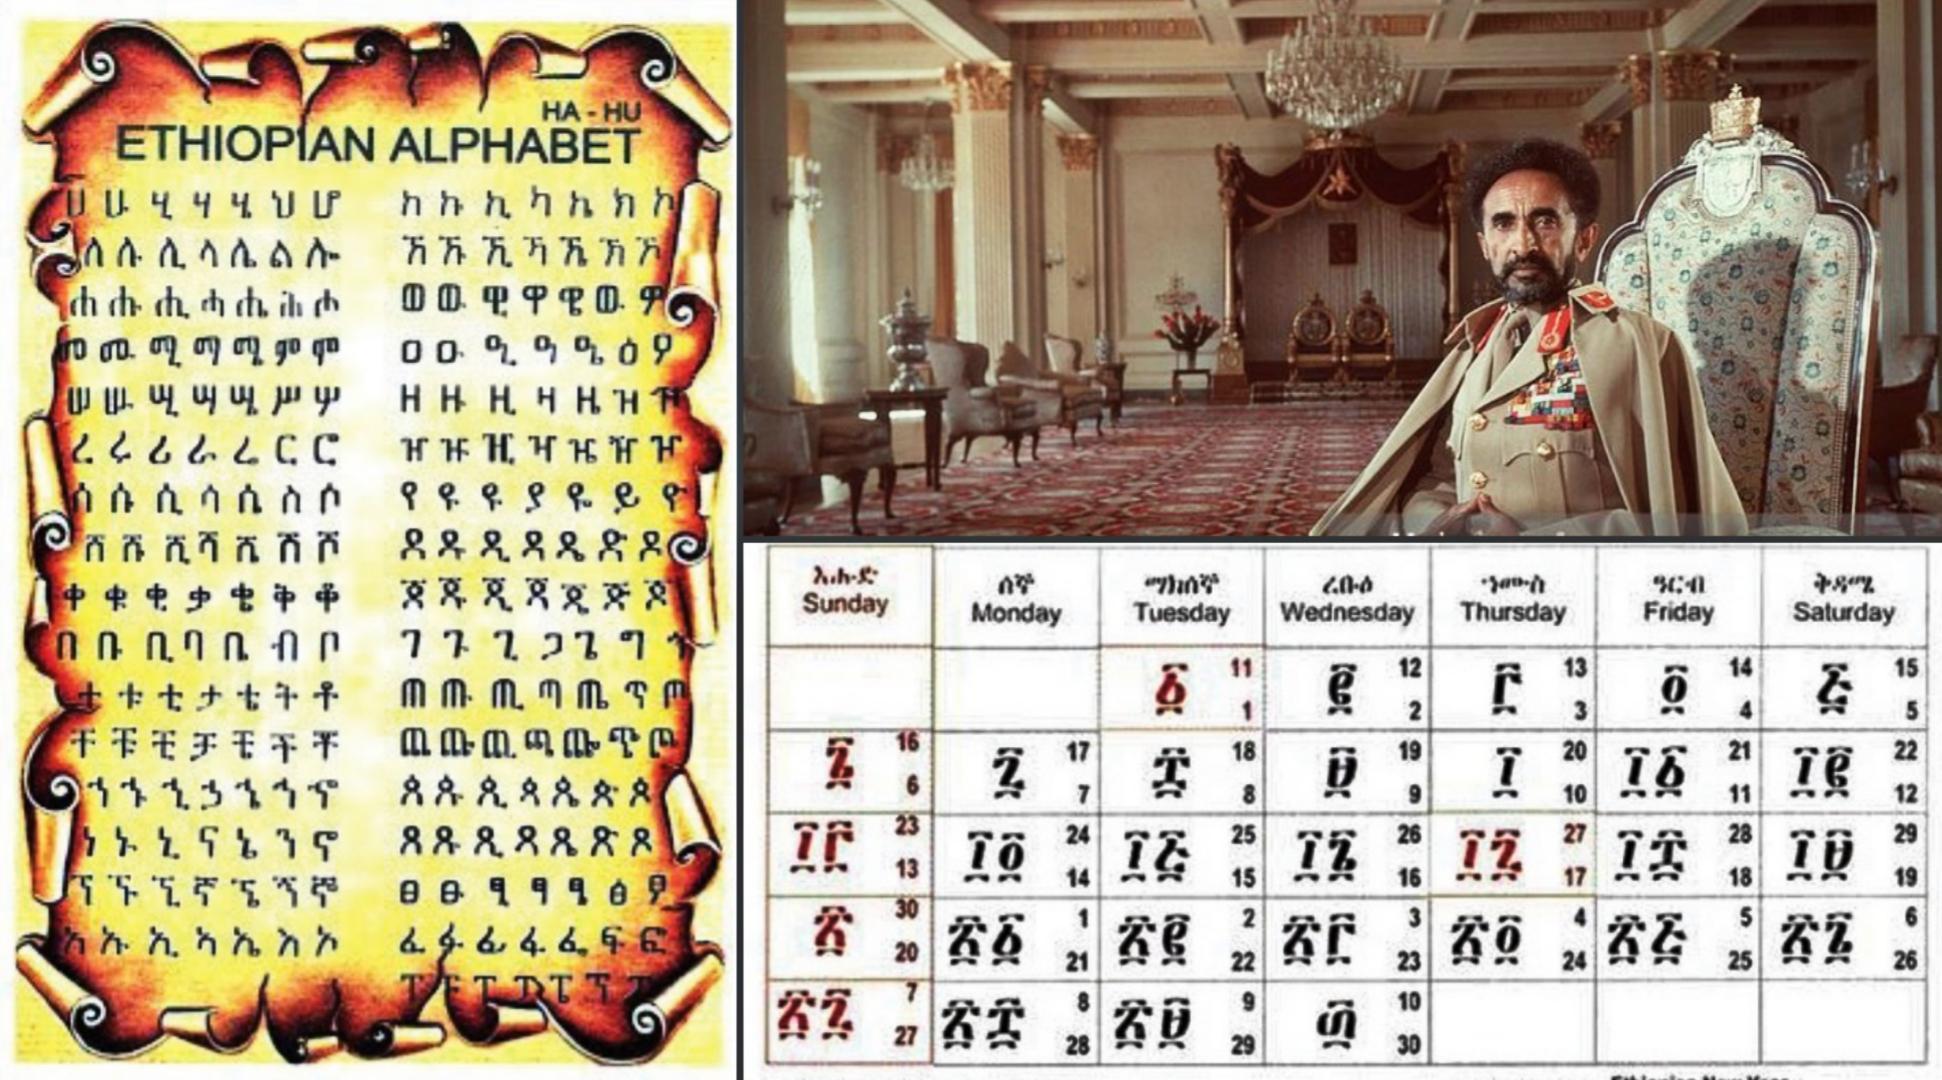 Ethiopia is the only African country with its own Calendar and alphabe developed since 100 BCE